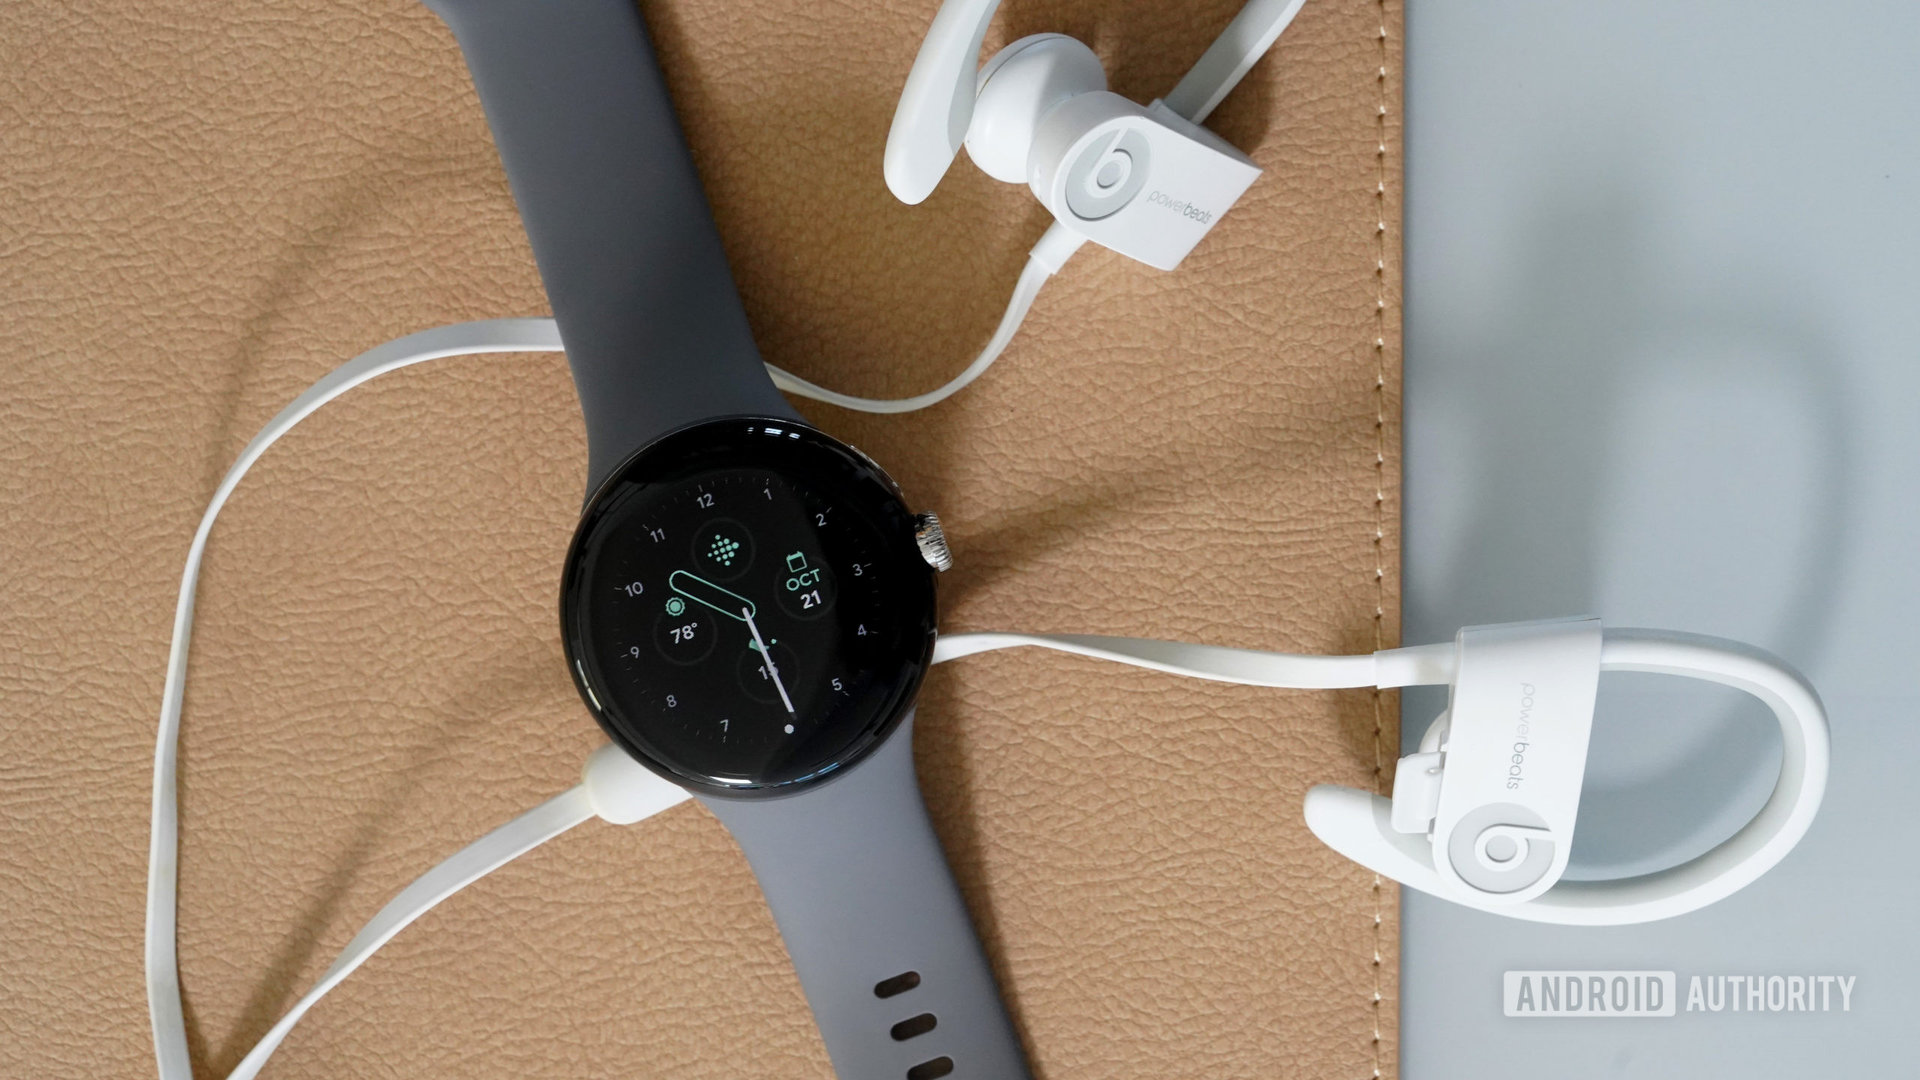 A Google Pixel Watch rests on a desk along side a pair of Bluetooth headphones.